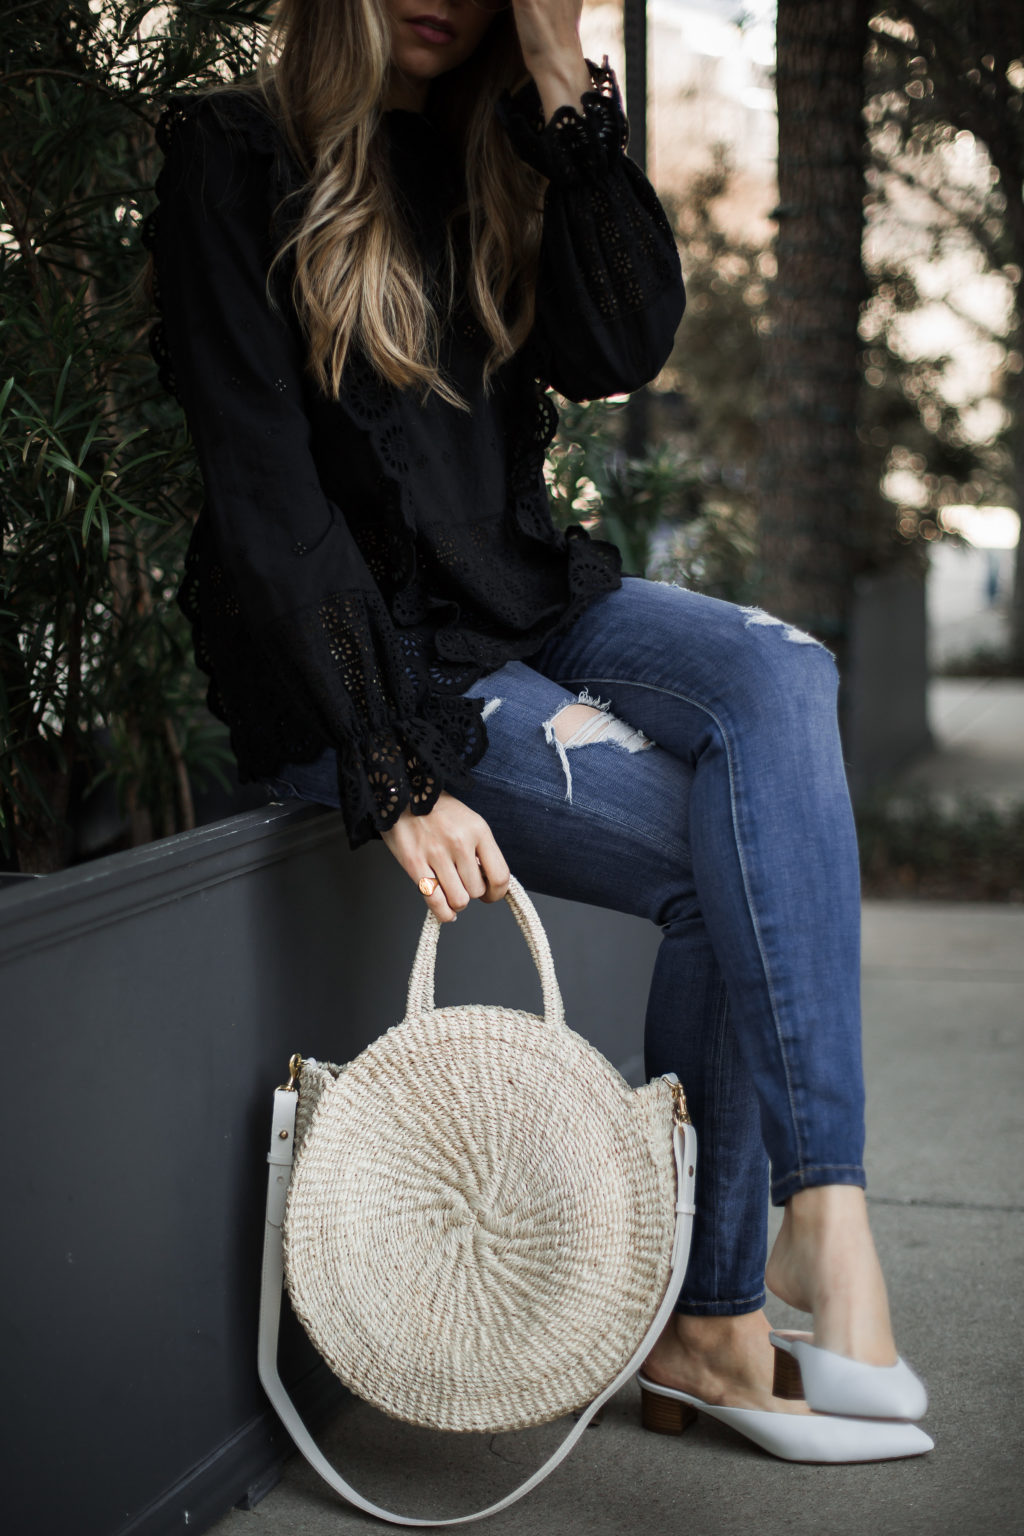 Black Eyelet Blouse and Clare V. Tote